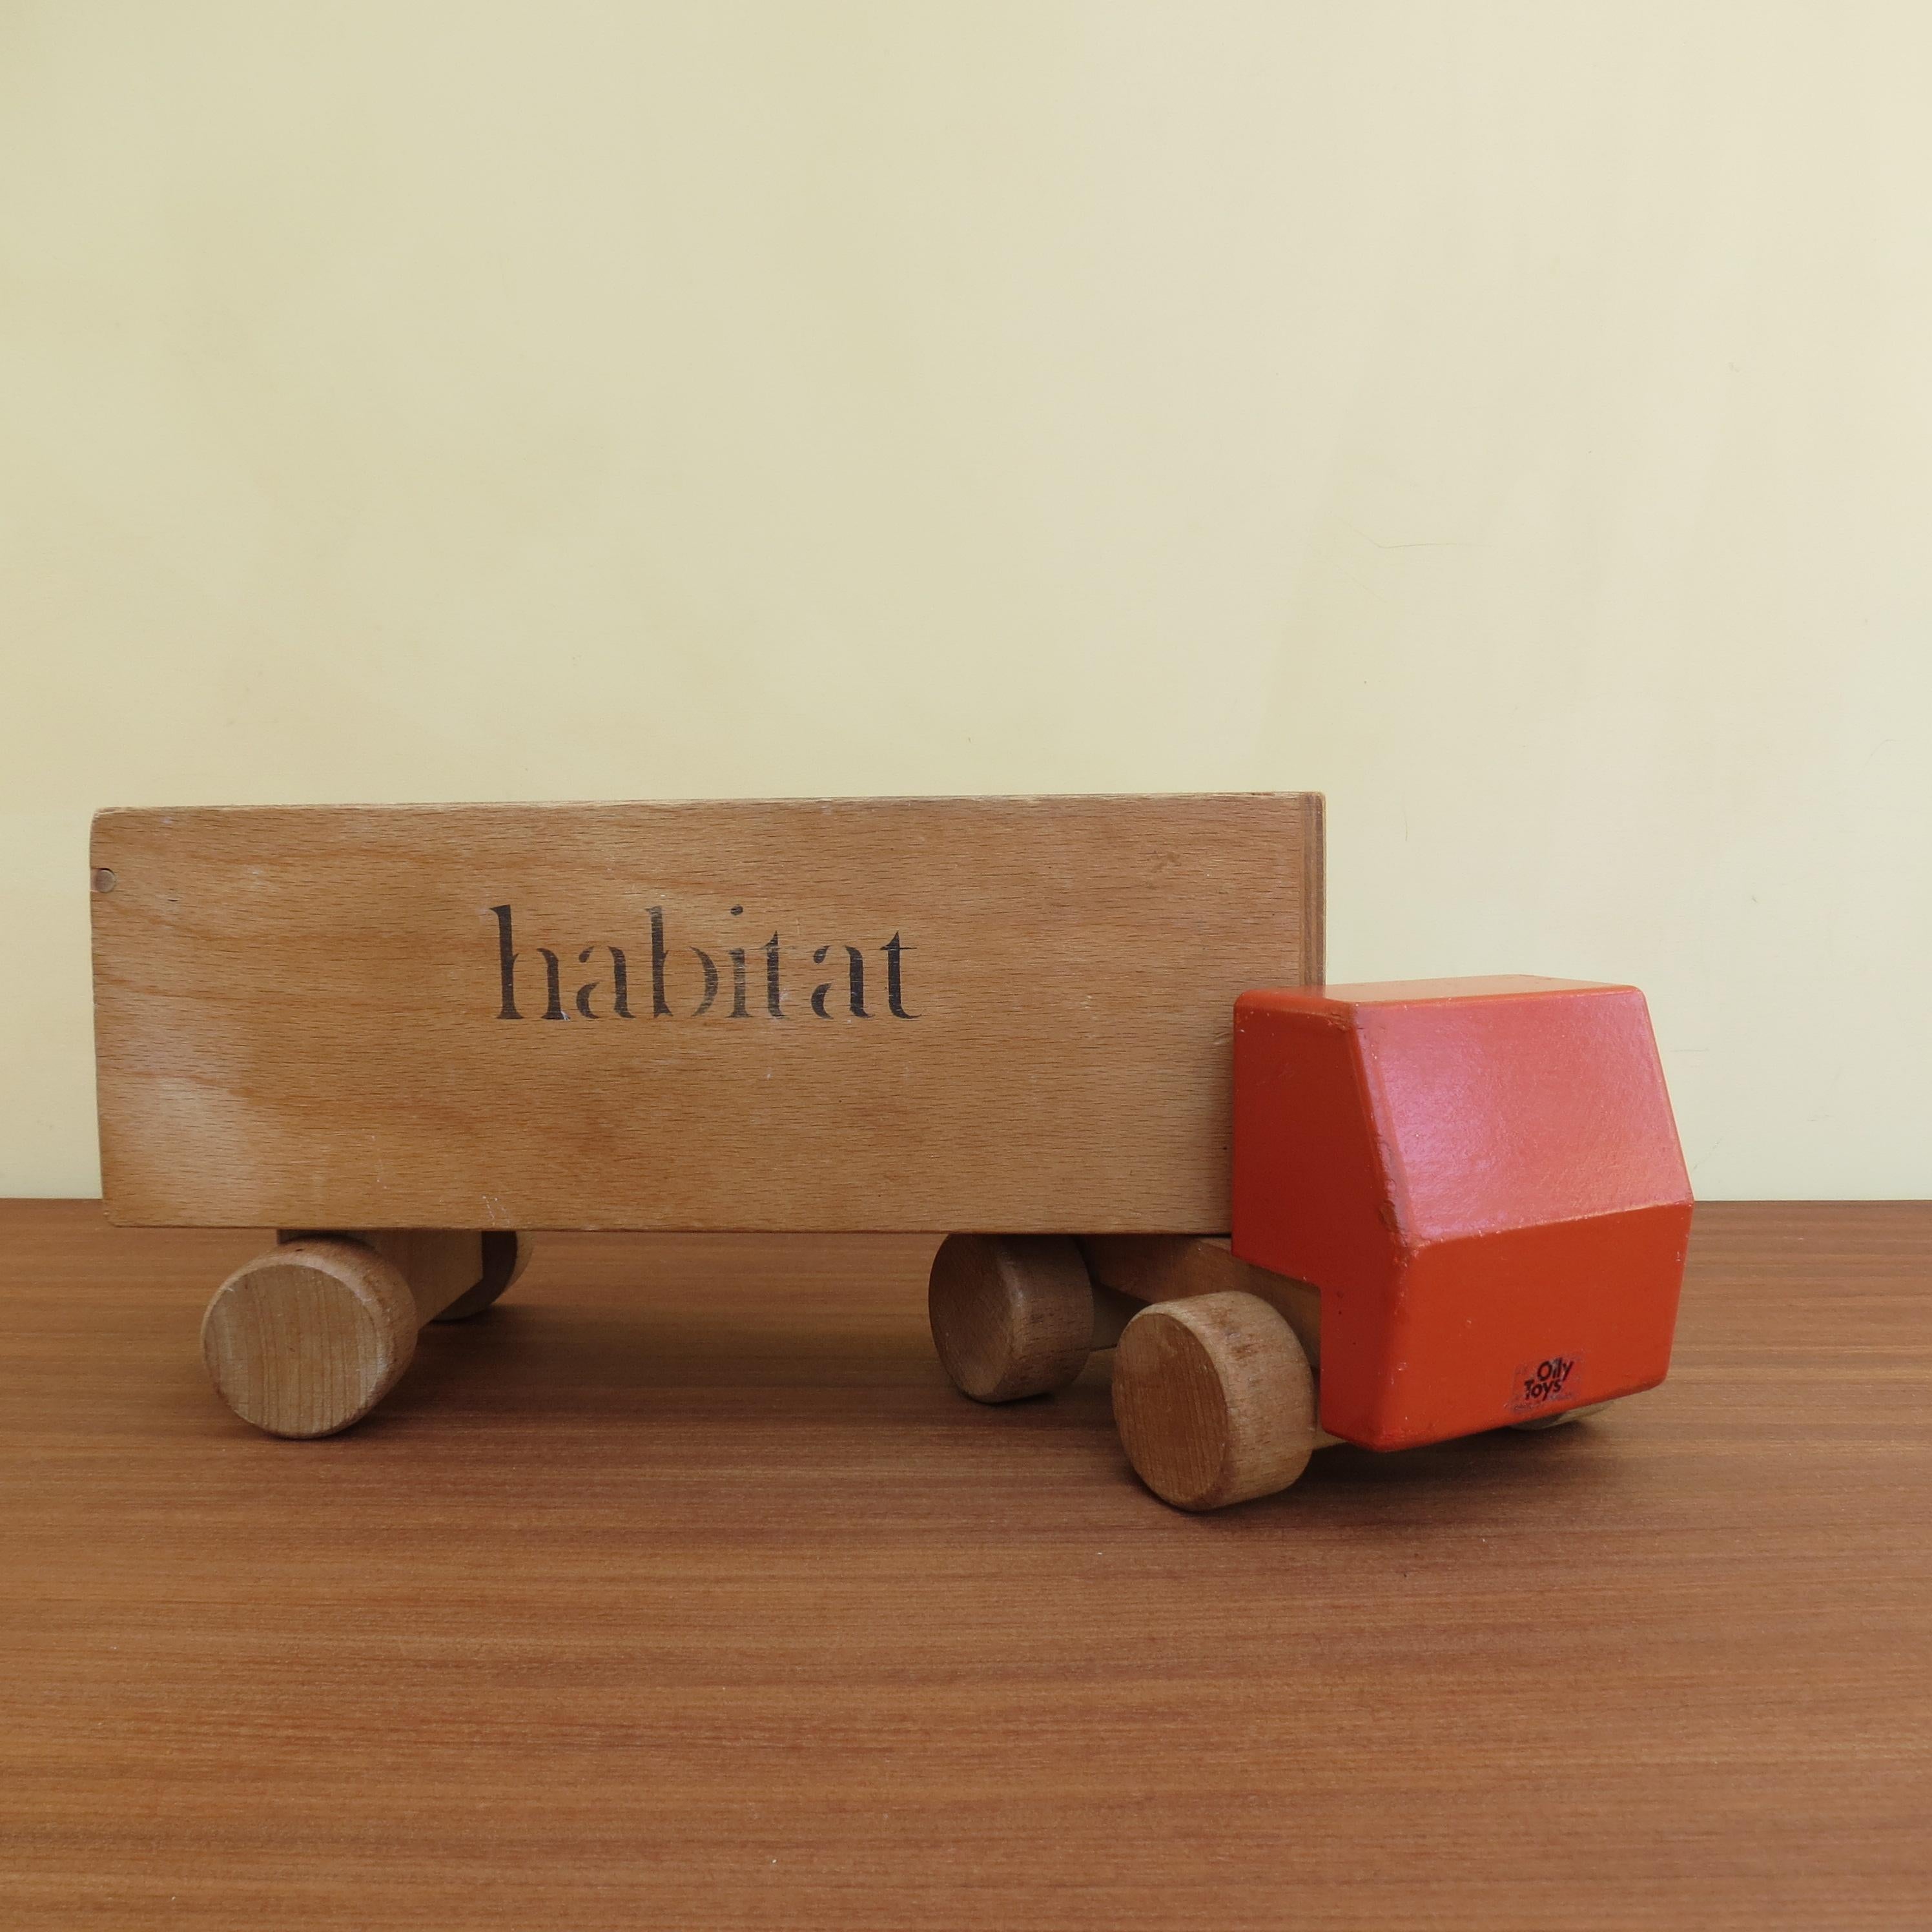 1970s Vintage Advertising Toy Lorry for Habitat Wooden Toy Lorry by Ryk Heuff 2